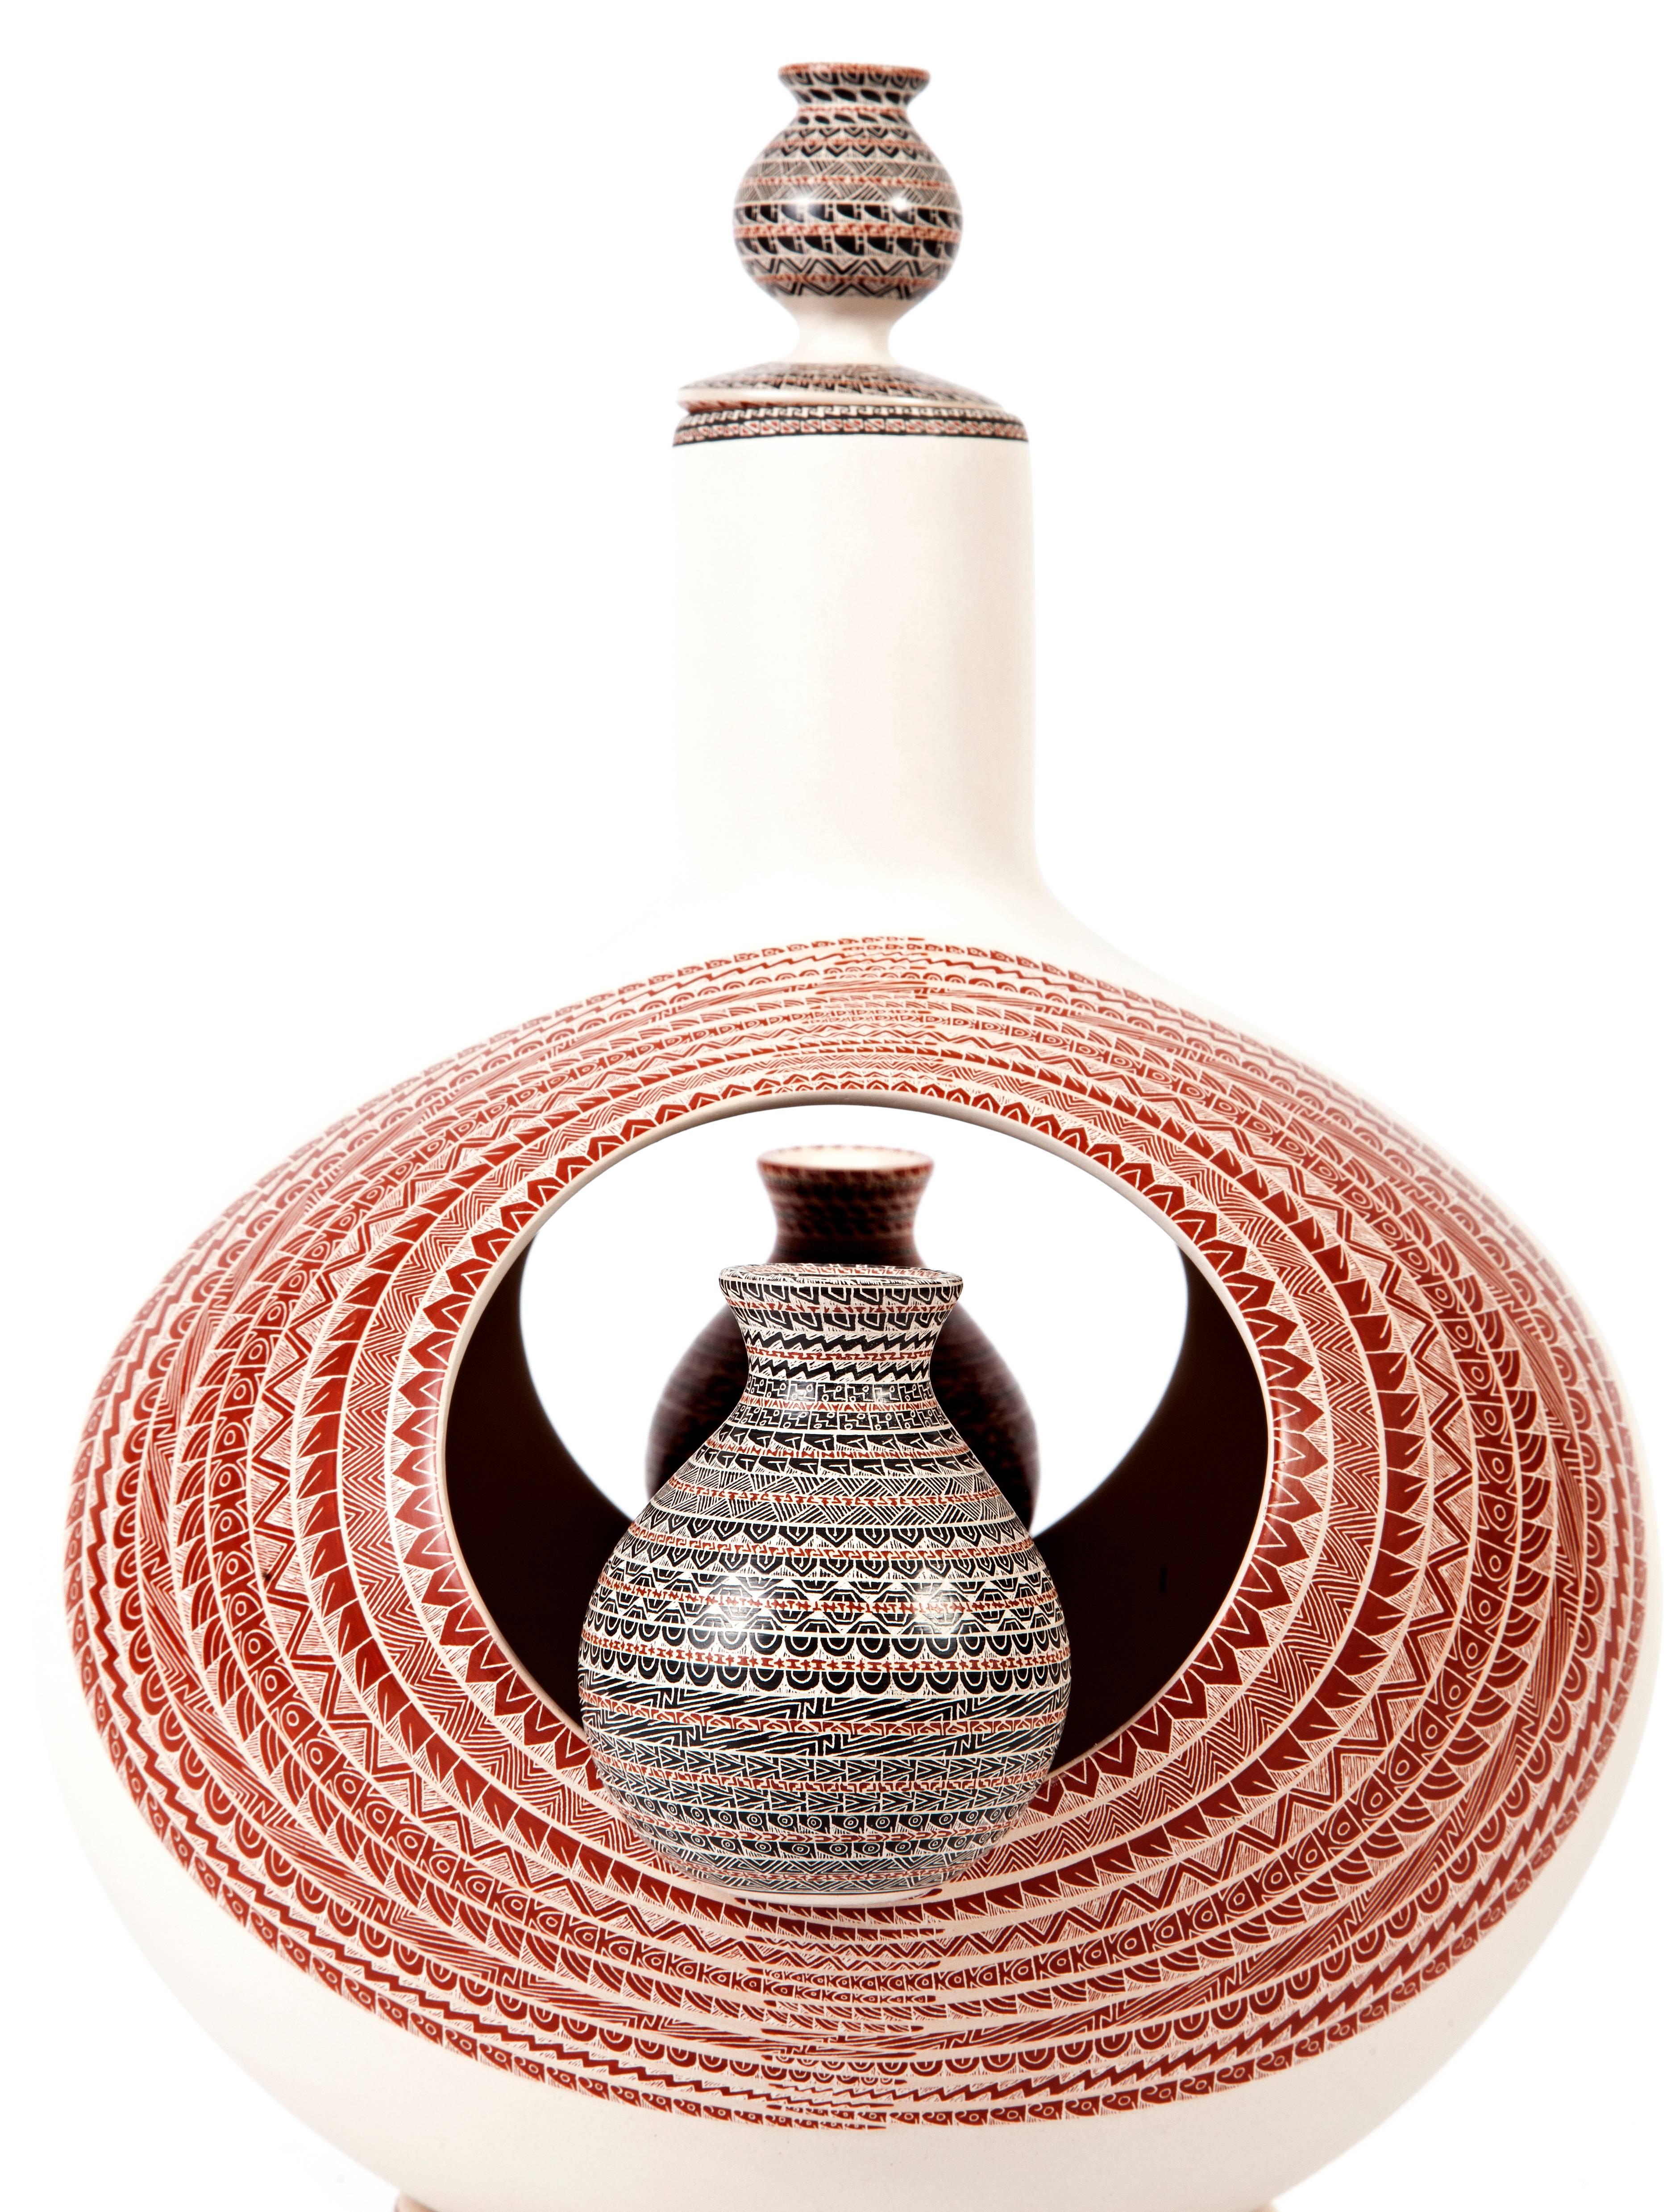 FREE SHIPPING TO WORLDWIDE

Artisan: Laura Bugarini Cota

MASTERPIECE

Carved polychrome jar painted with geometric design.  

- Dimensions: 11